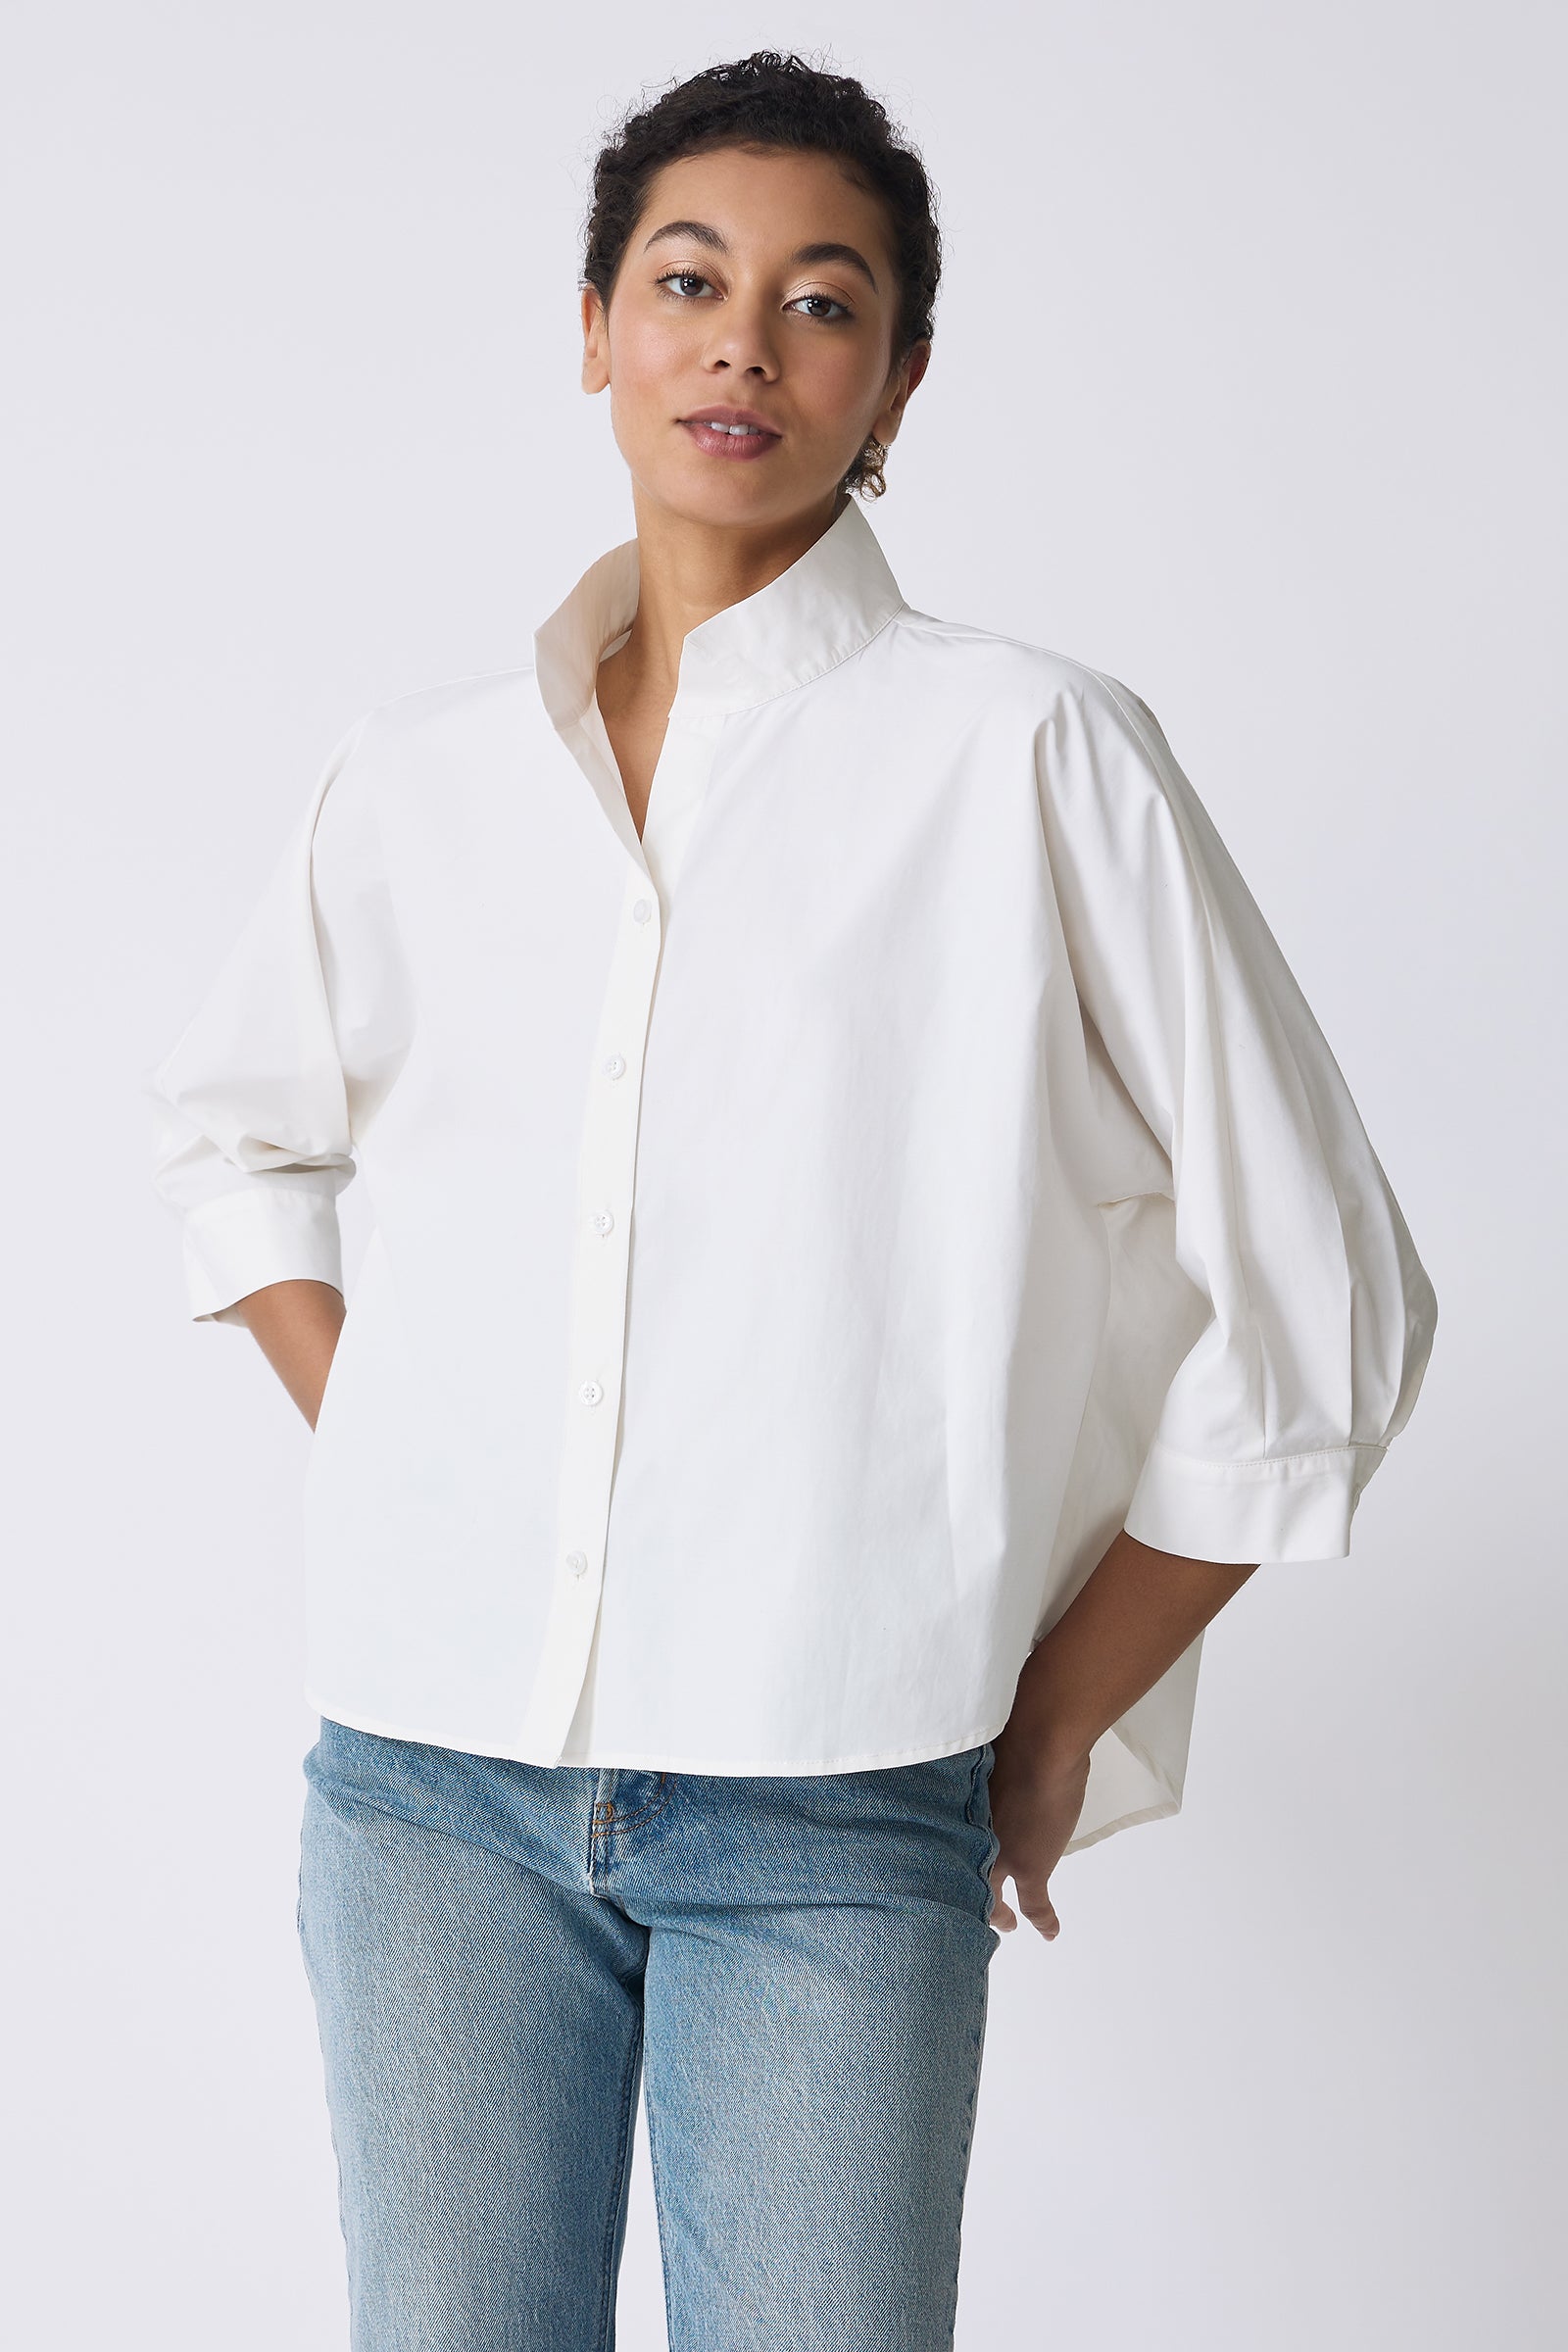 Kal Rieman Avi Shirt in Ecru on model with hands by hips front view